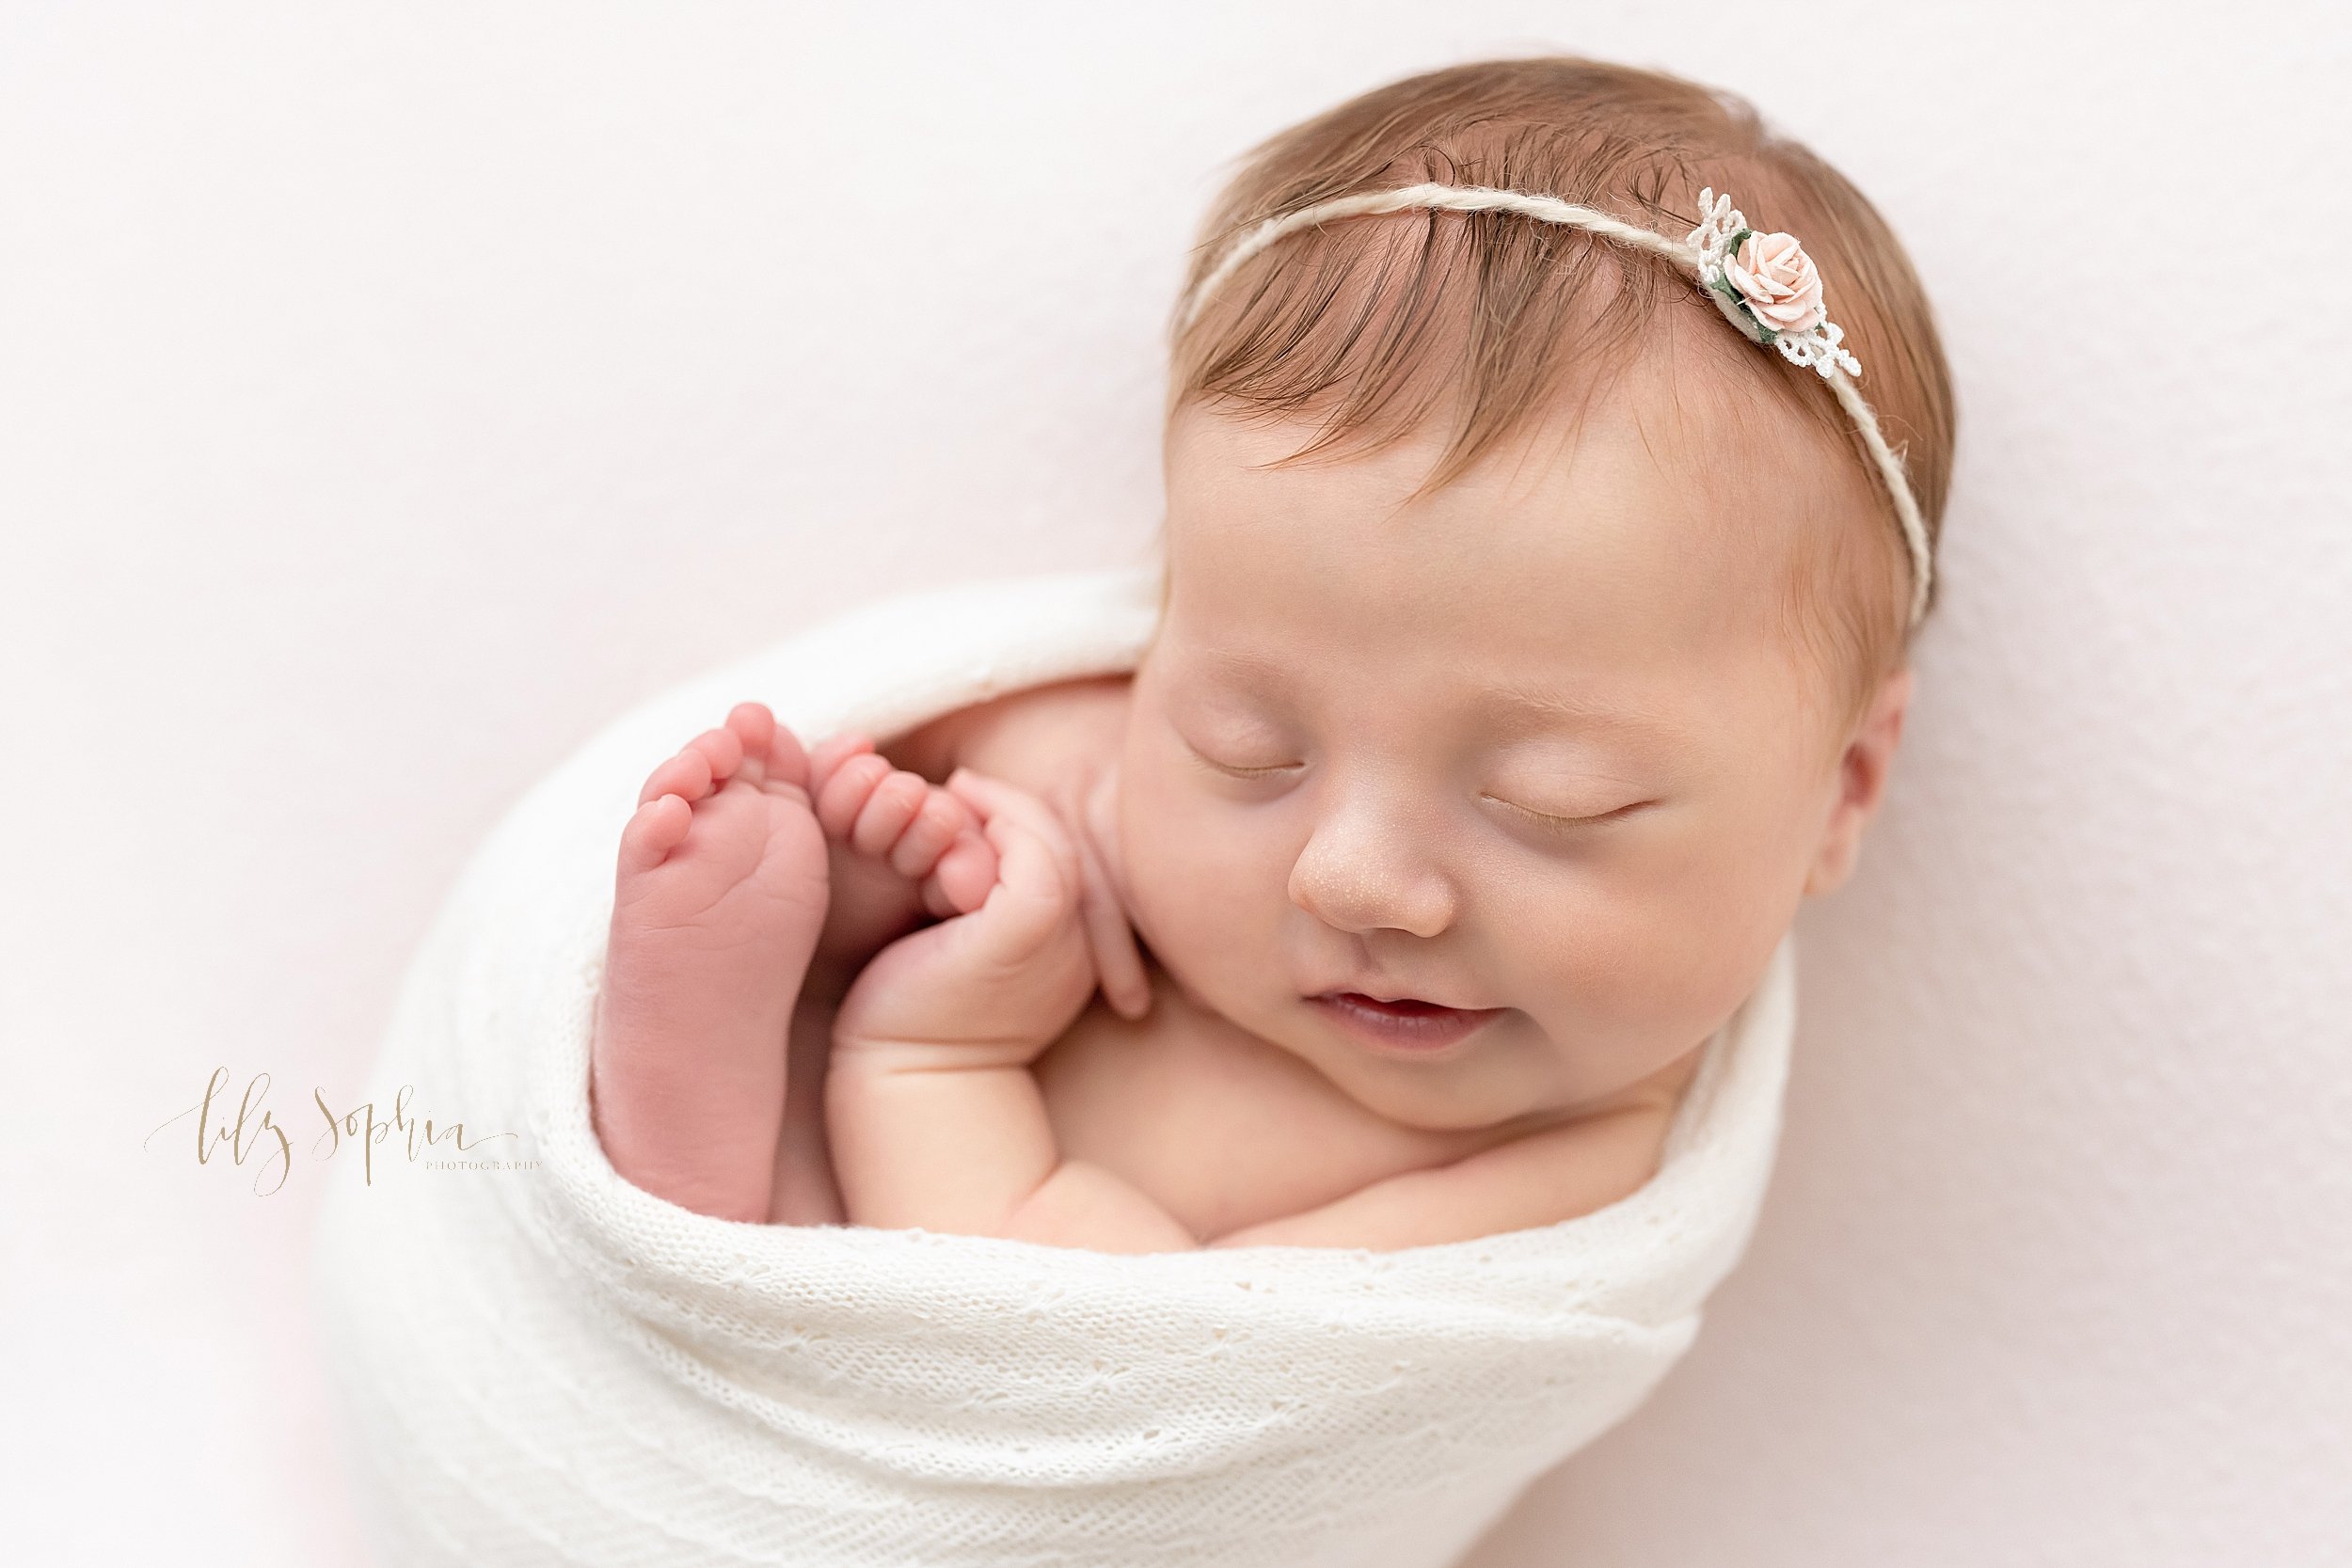  Newborn portrait of a peacefully sleeping infant girl who is nestled in a stretchy swaddle wearing a rose bud headband in her hair taken in a studio near Buckhead in Atlanta that uses natural light. 